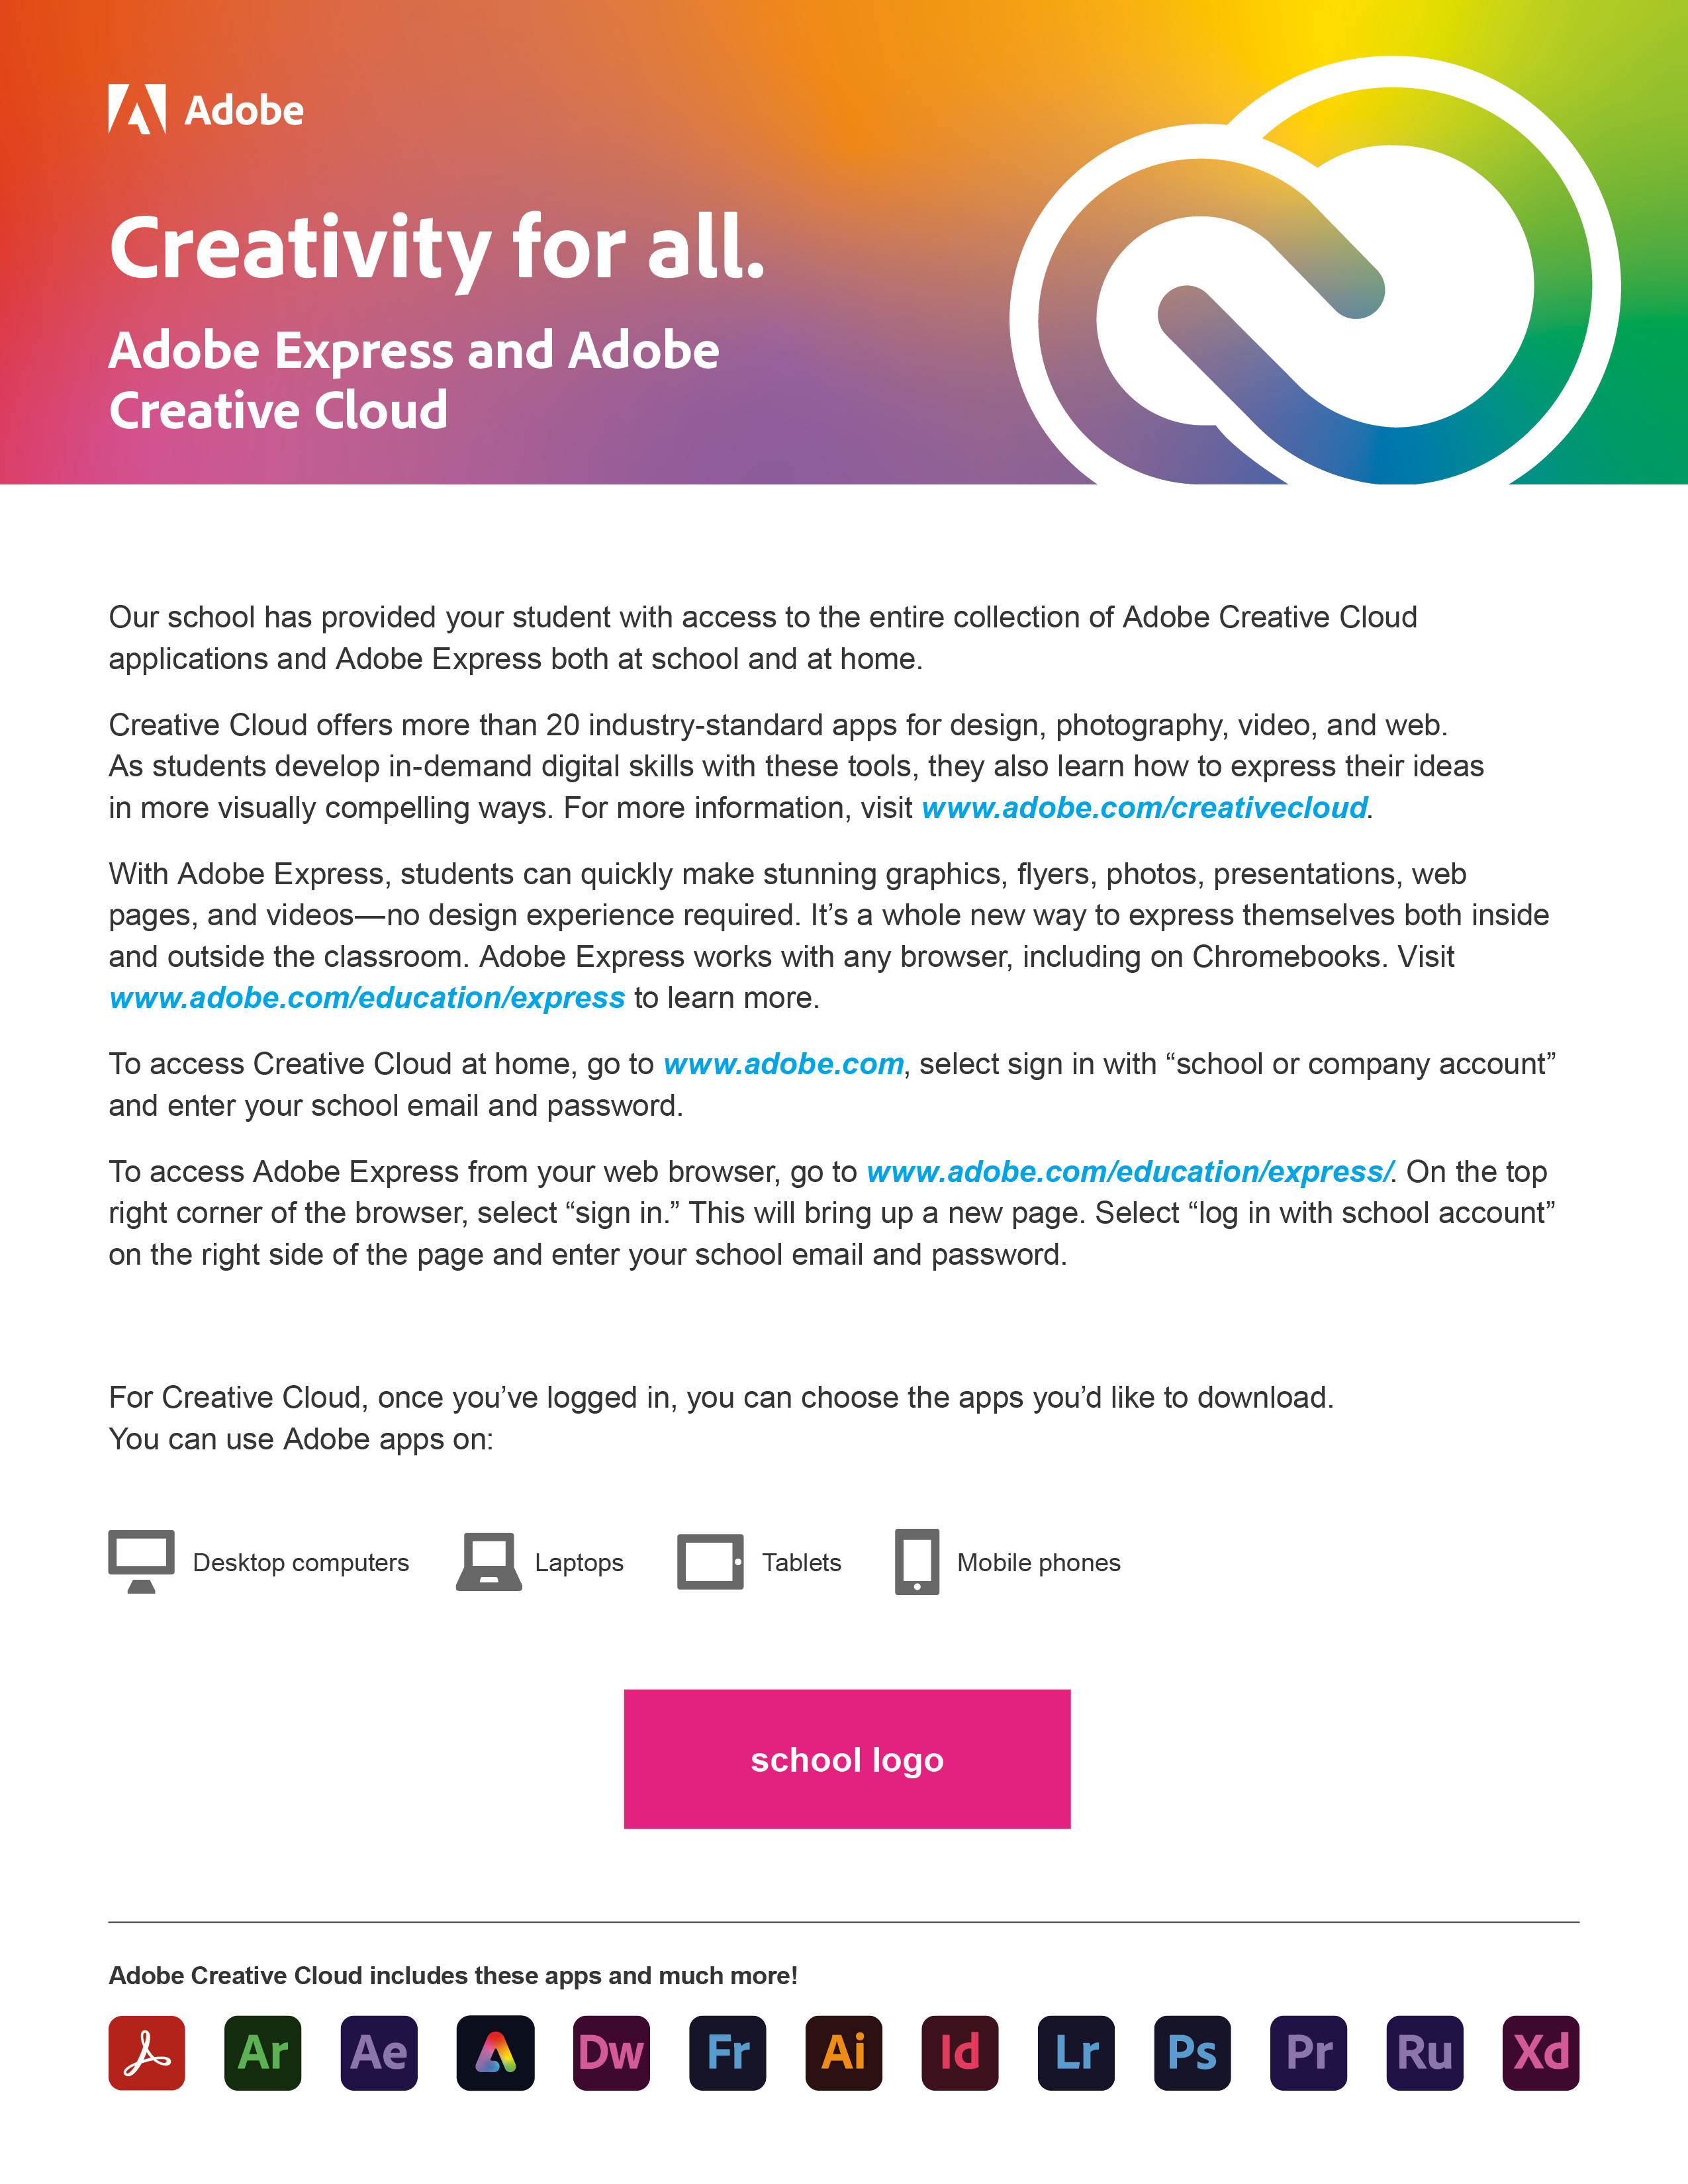 Adobe Express and Creative Cloud — with school logo